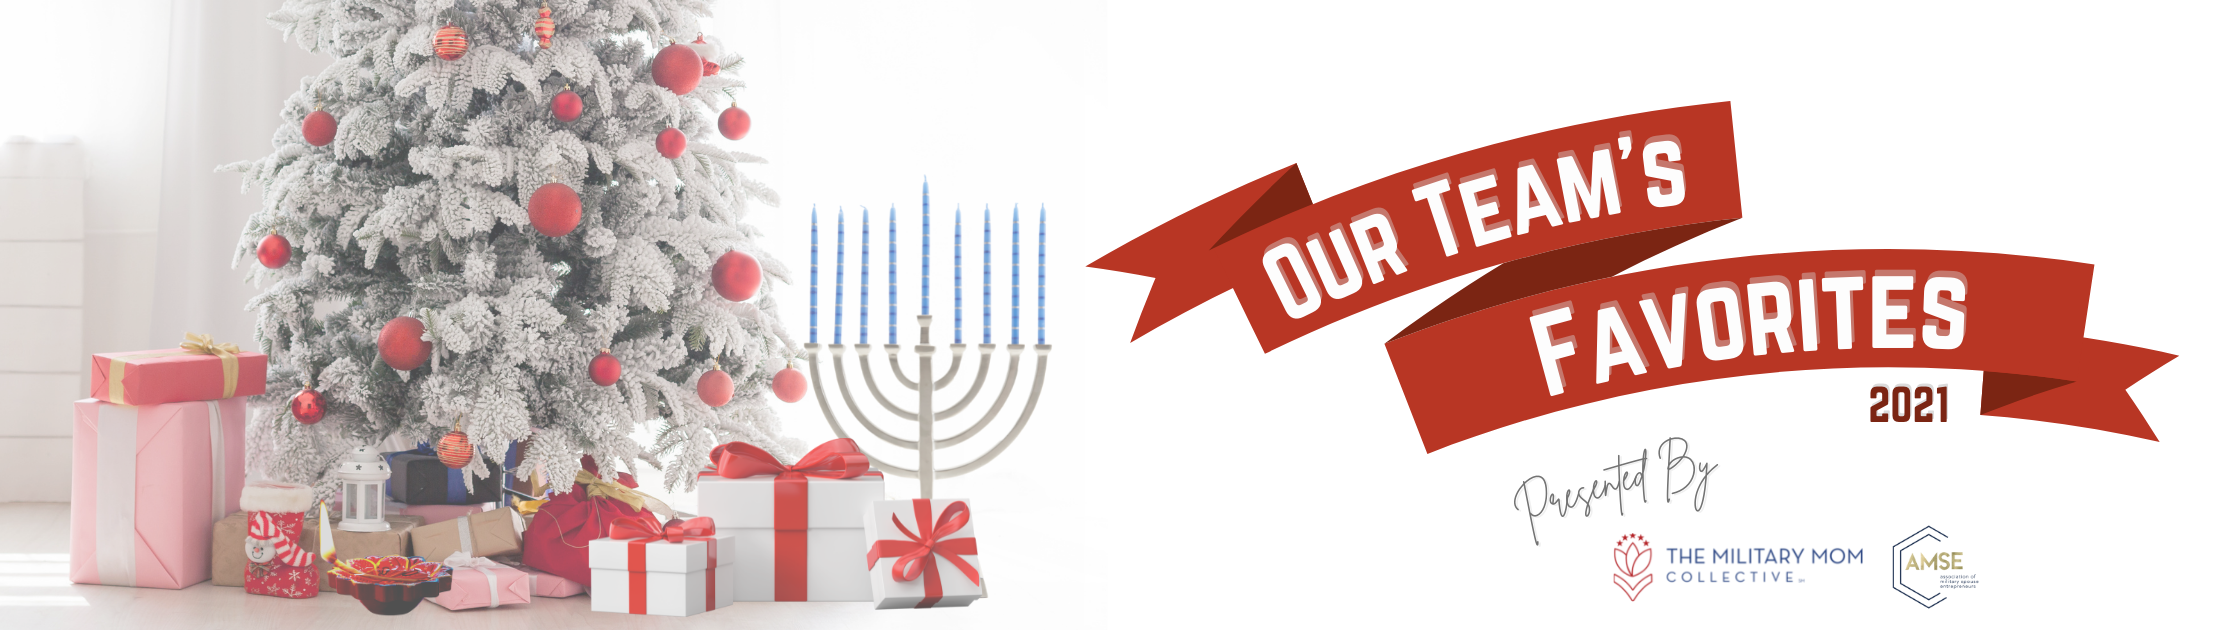 holiday tree, menorah, and gifts with "Our Team's Favorites 2021" in text with MMC and AMSE logos